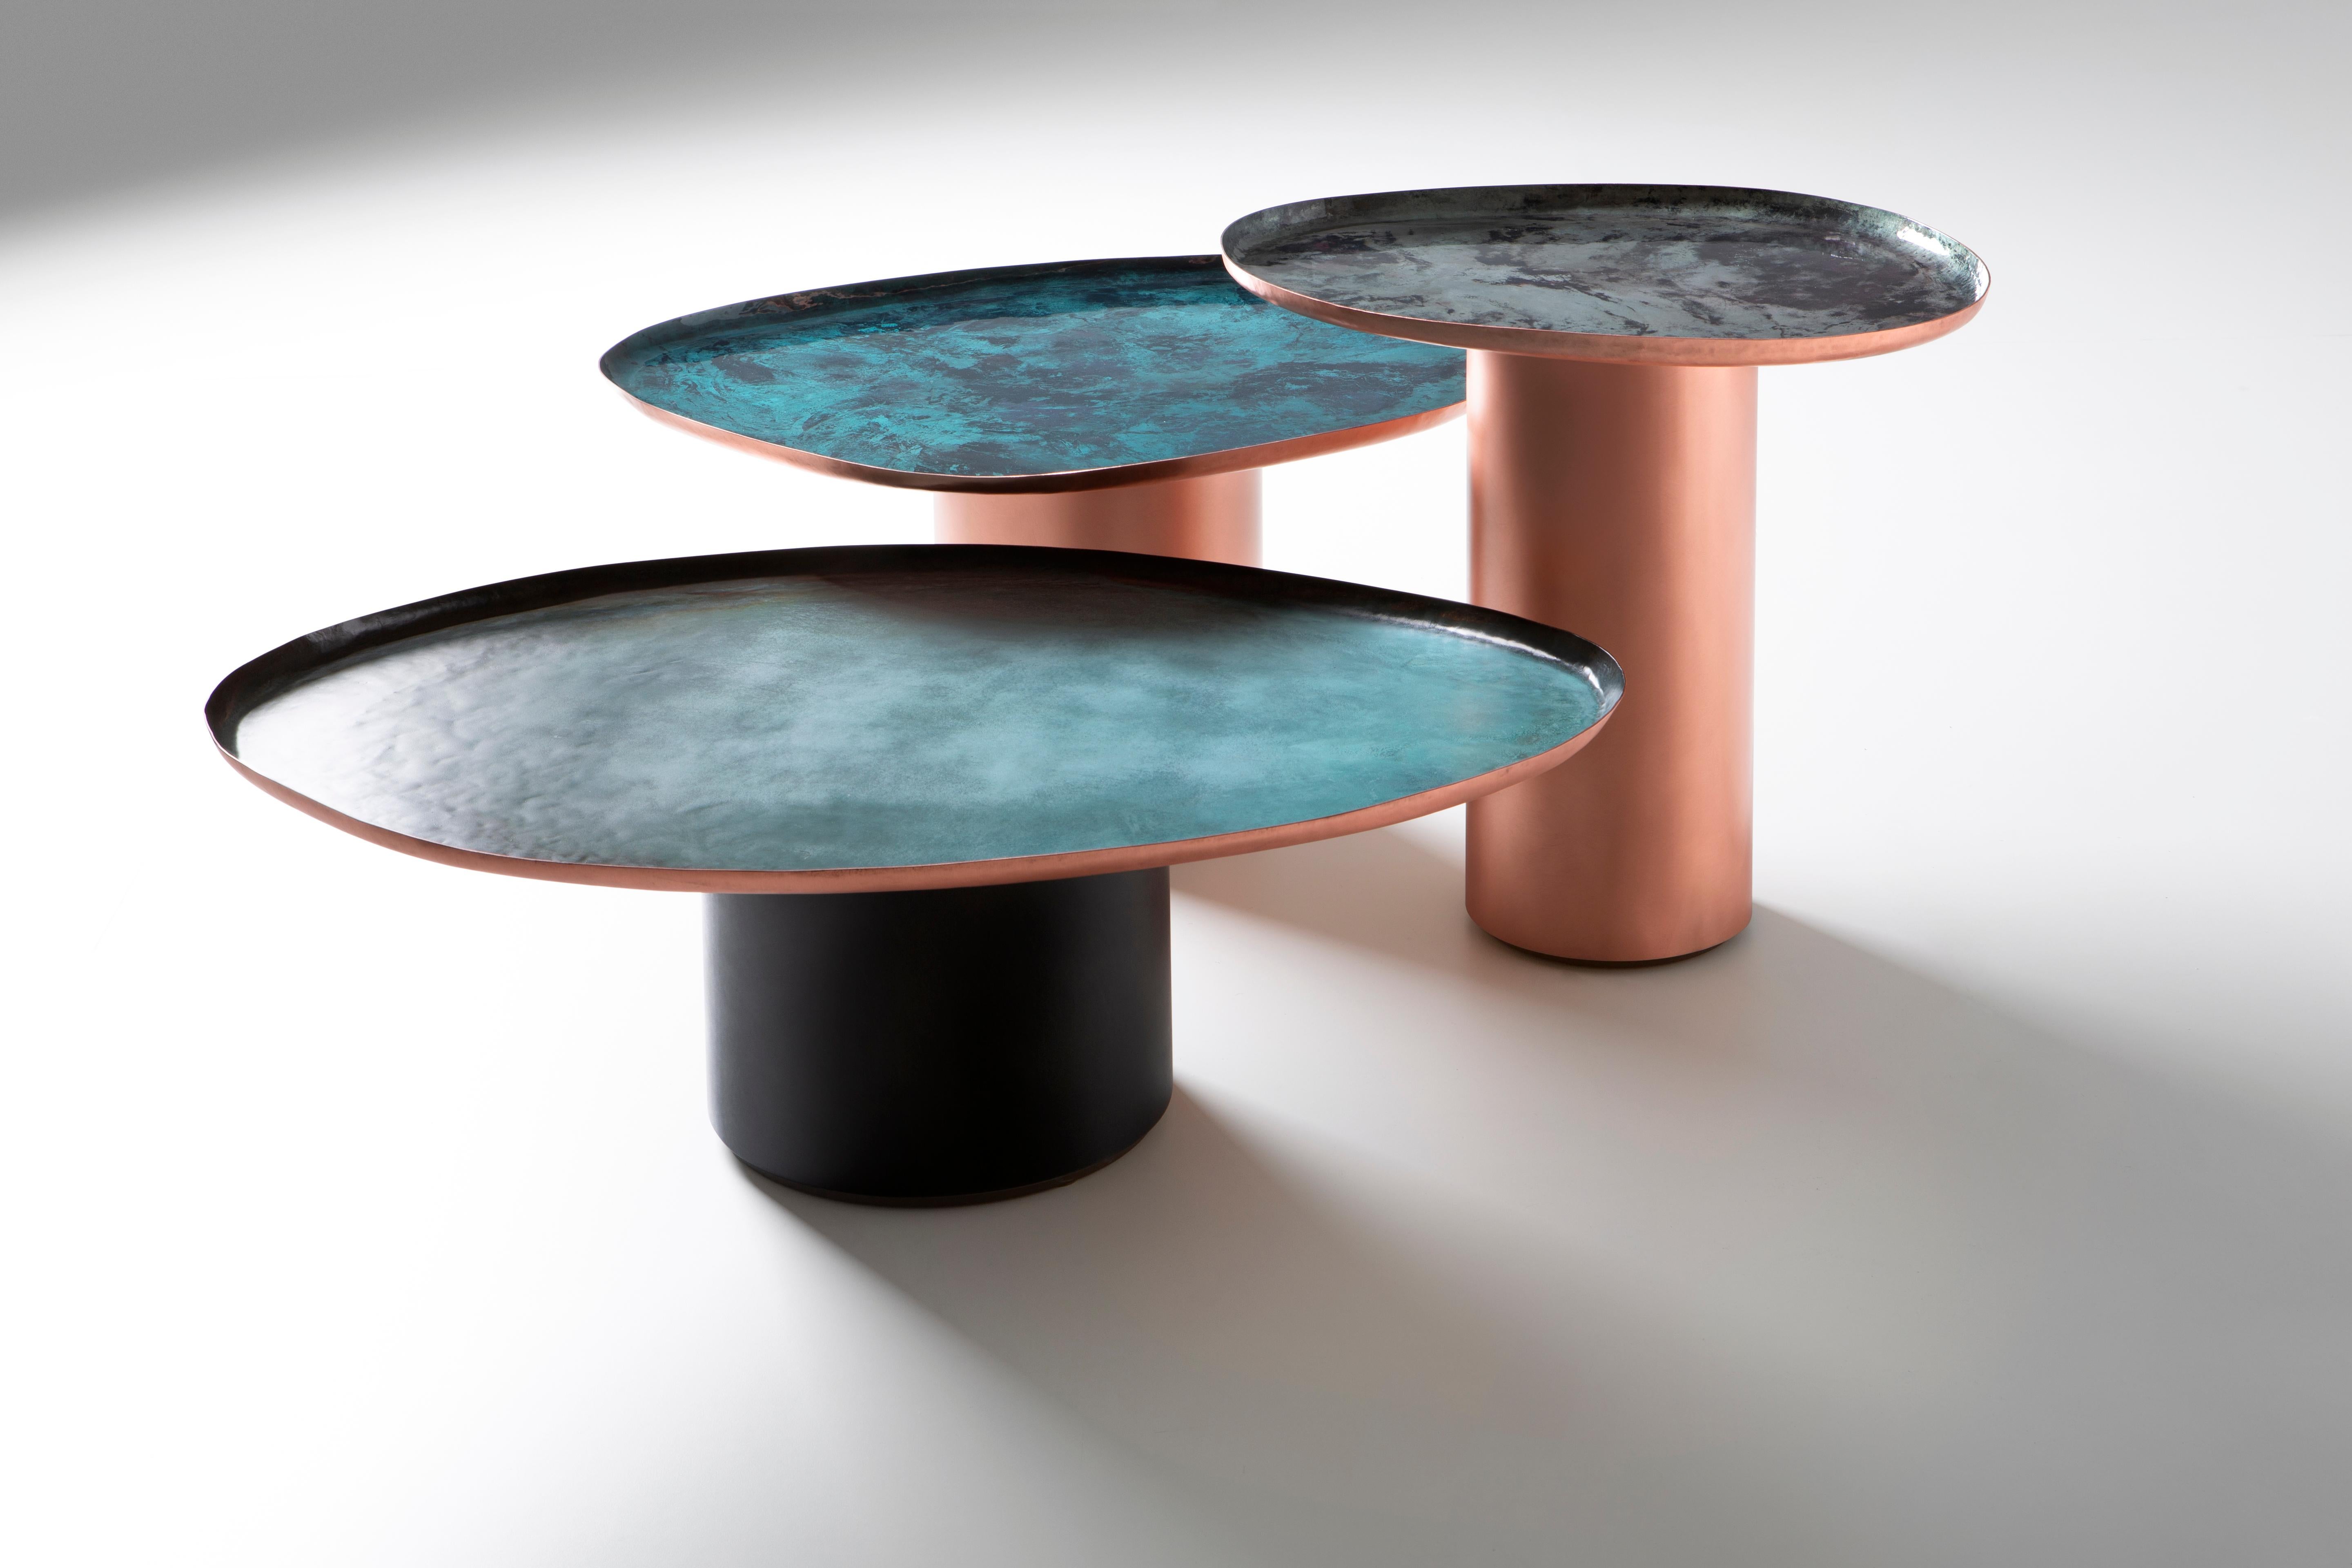 Drops is a family of coffee tables in three different sizes, inspired by the unexpected, irregular shapes of water droplets on a surface. Their soft, familiar lines embody the skilled craftsmanship and artisan know-how of De Castelli, which has